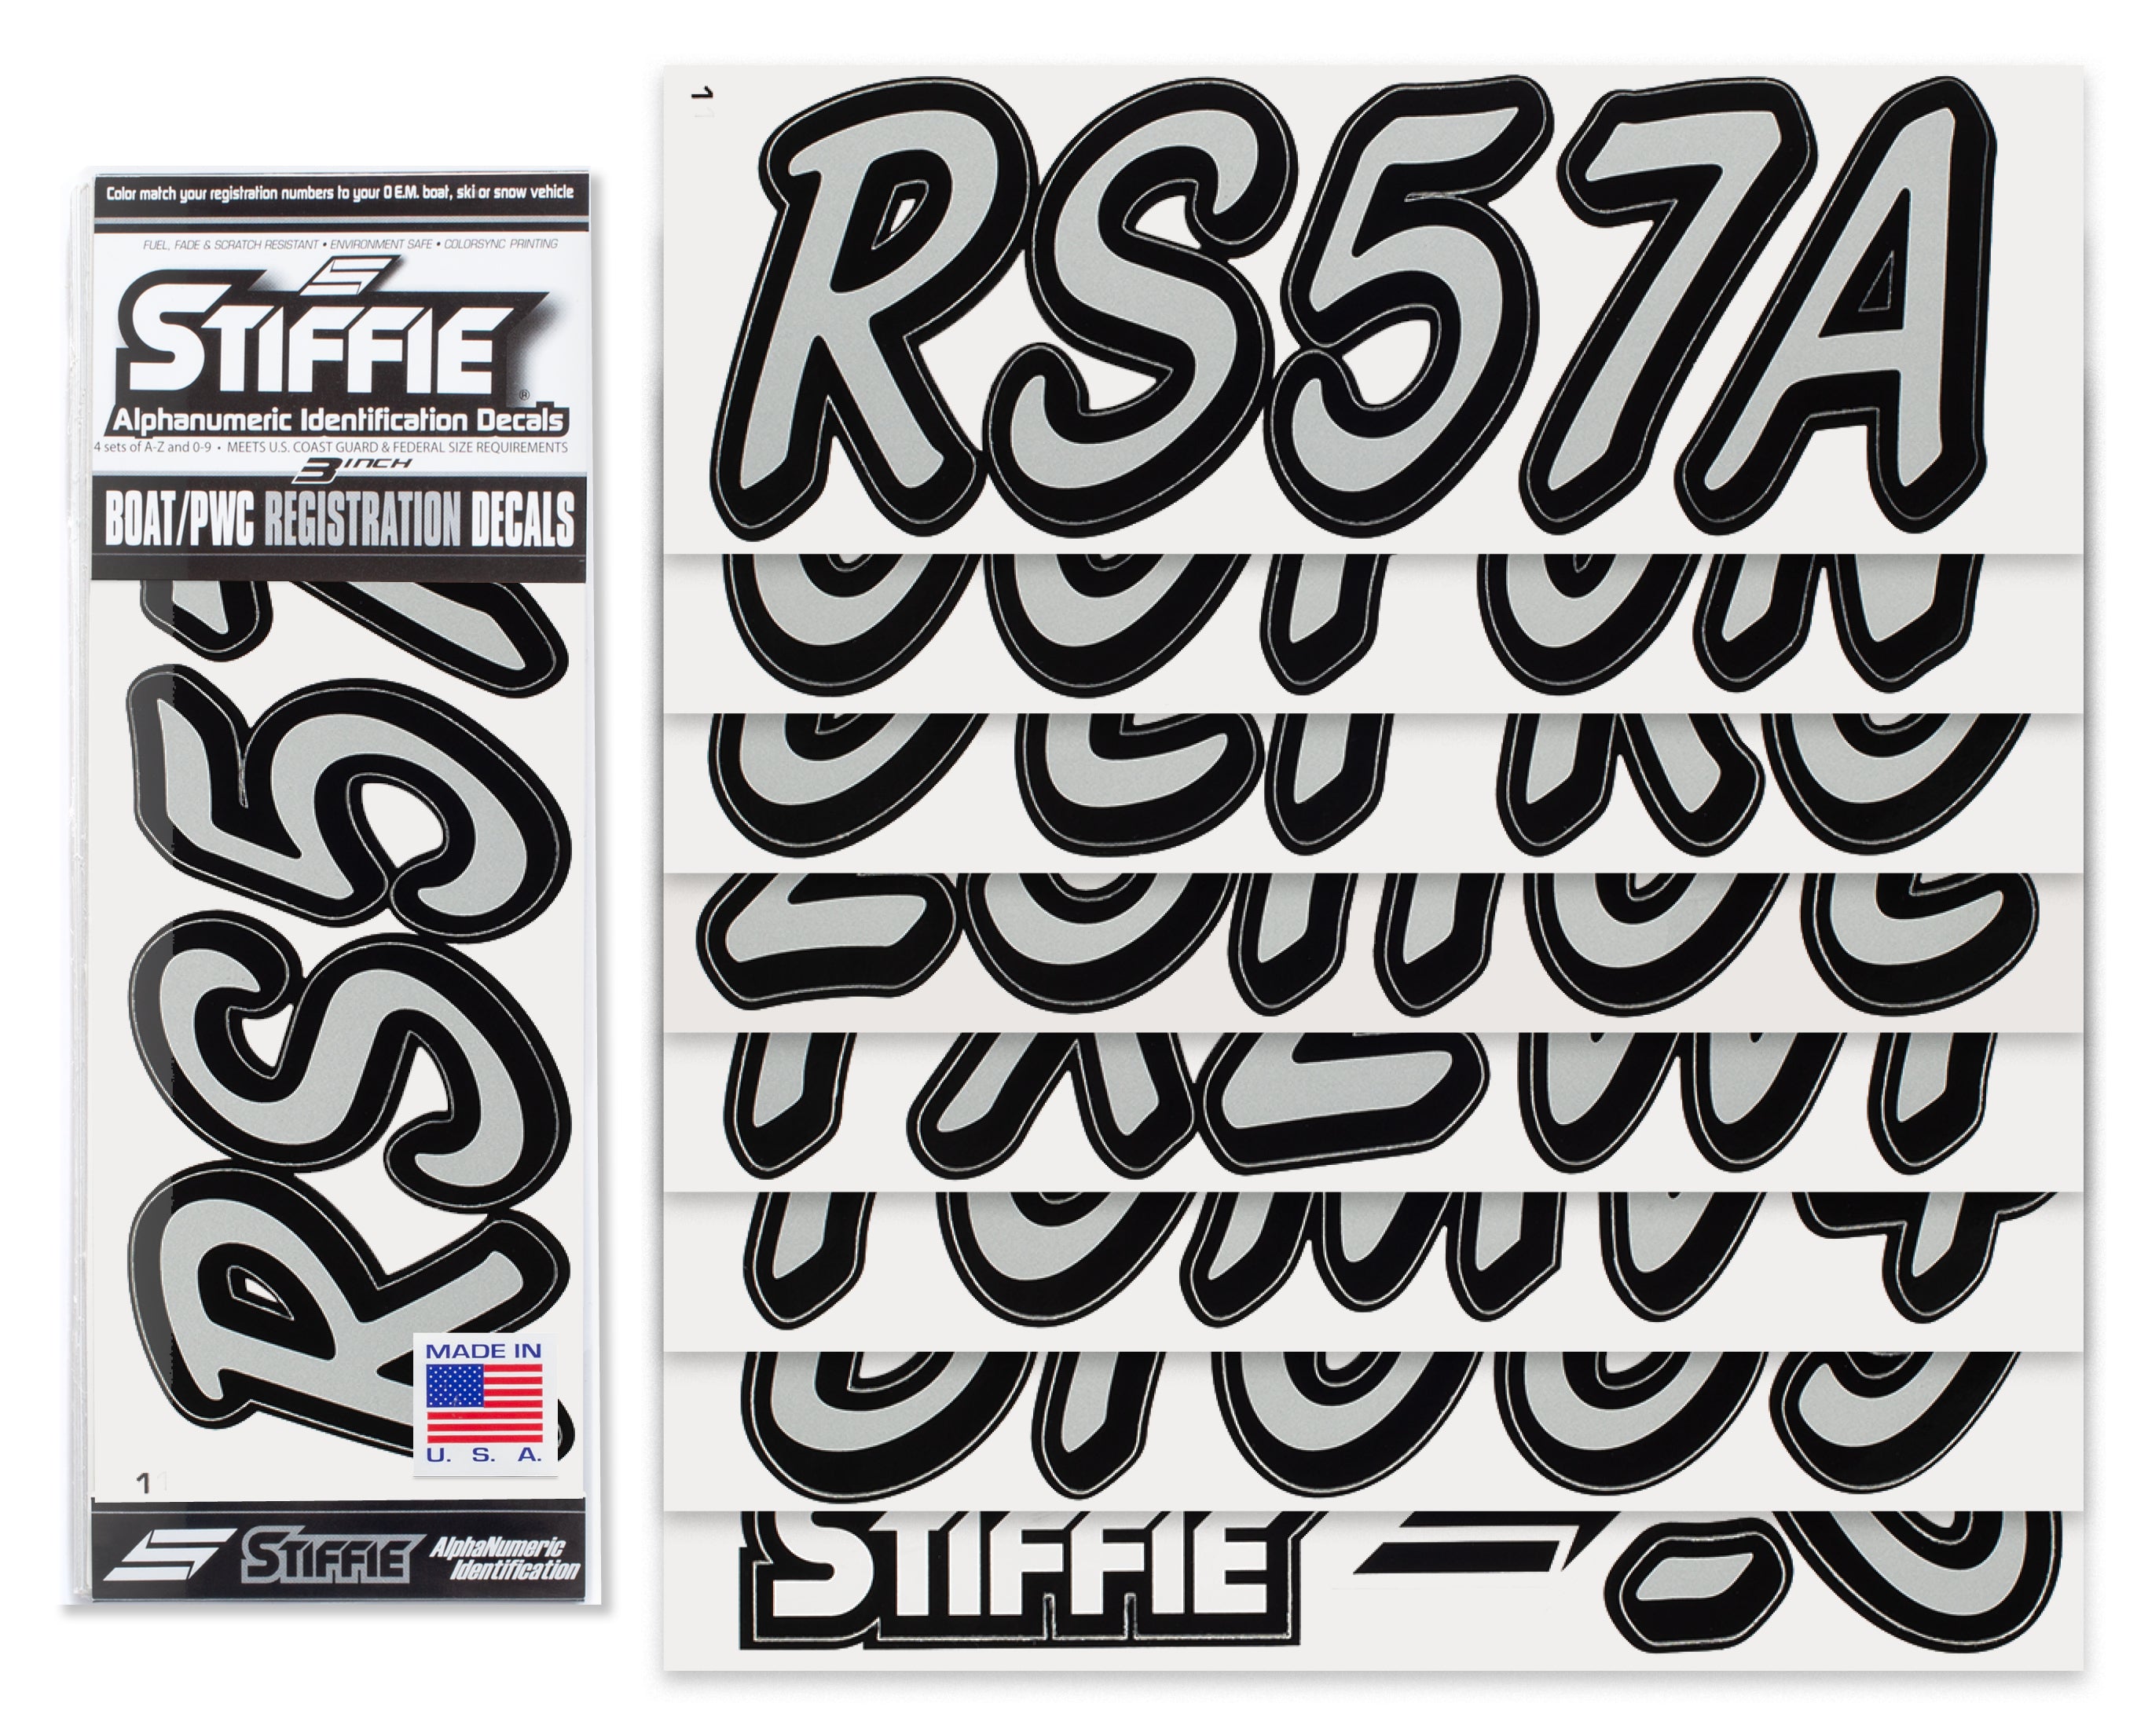 STIFFIE Whipline Solid Metallic Silver/Black 3" Alpha-Numeric Registration Identification Numbers Stickers Decals for Boats & Personal Watercraft